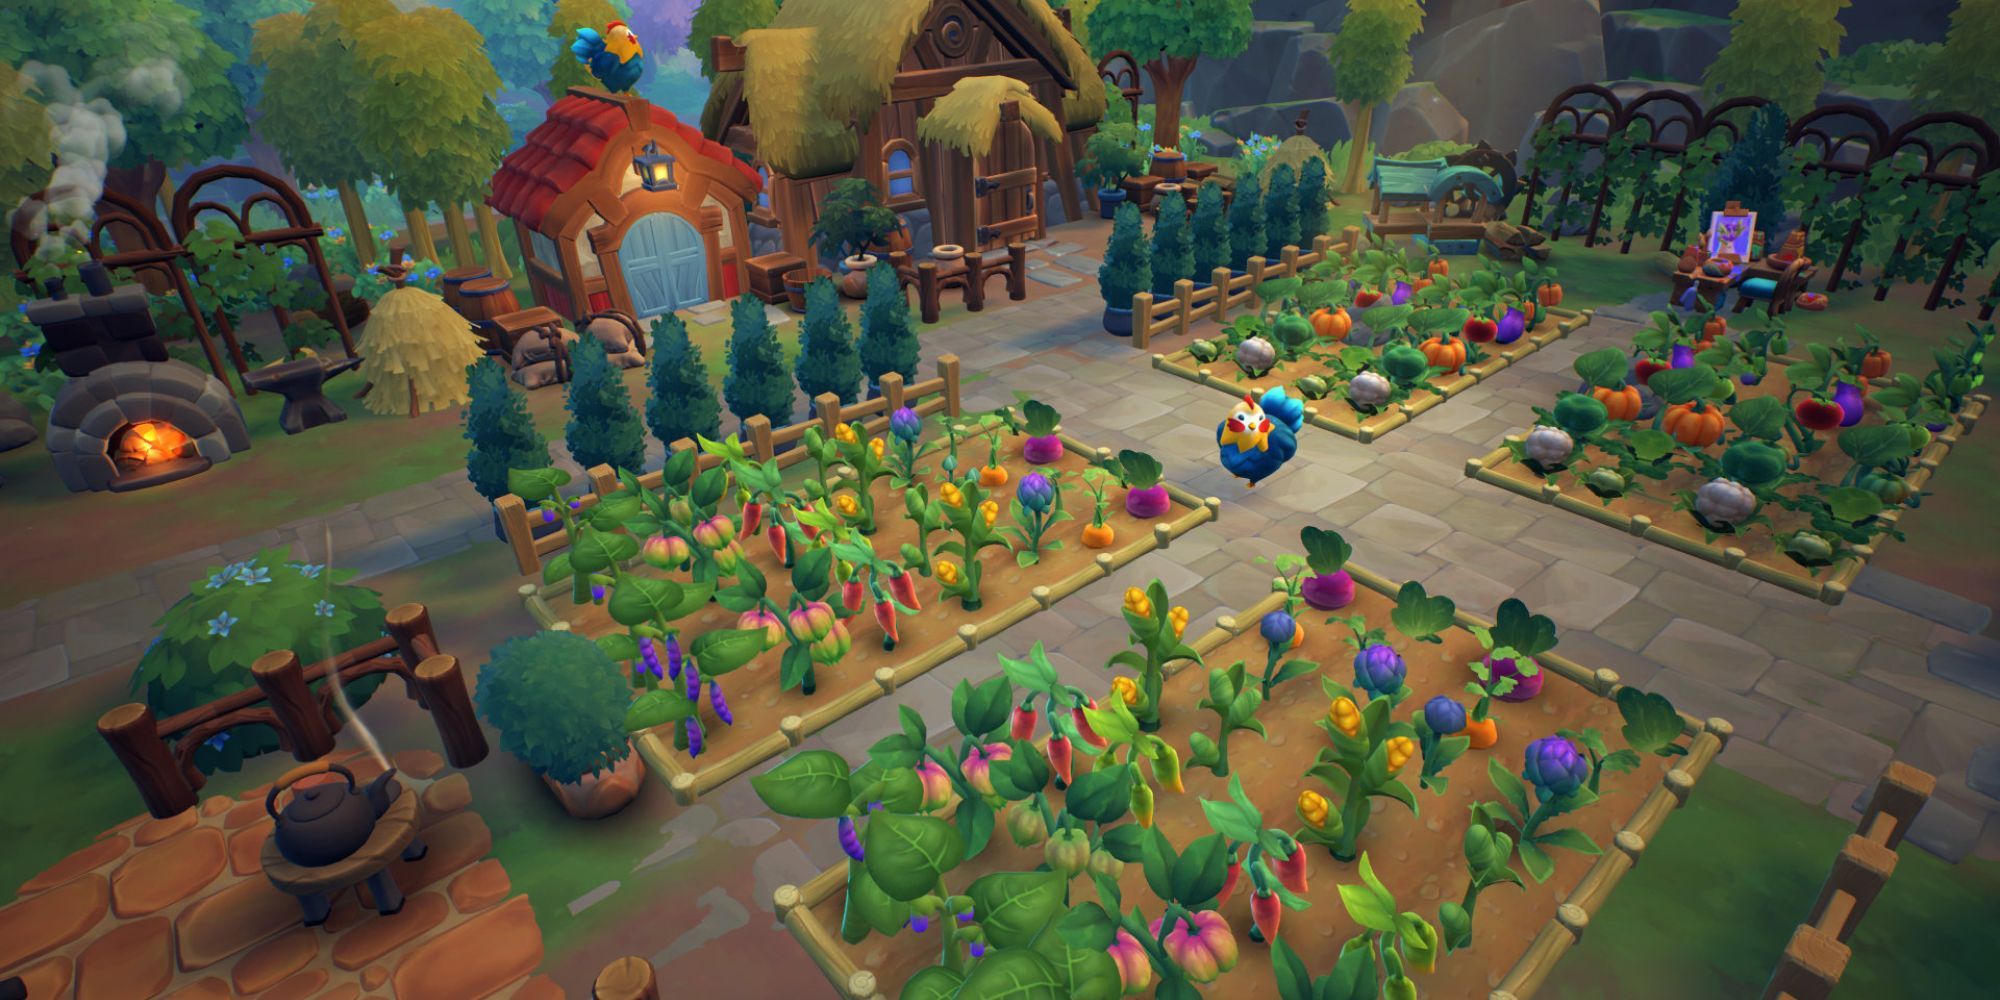 An overview of the Fae Farm in the player's home